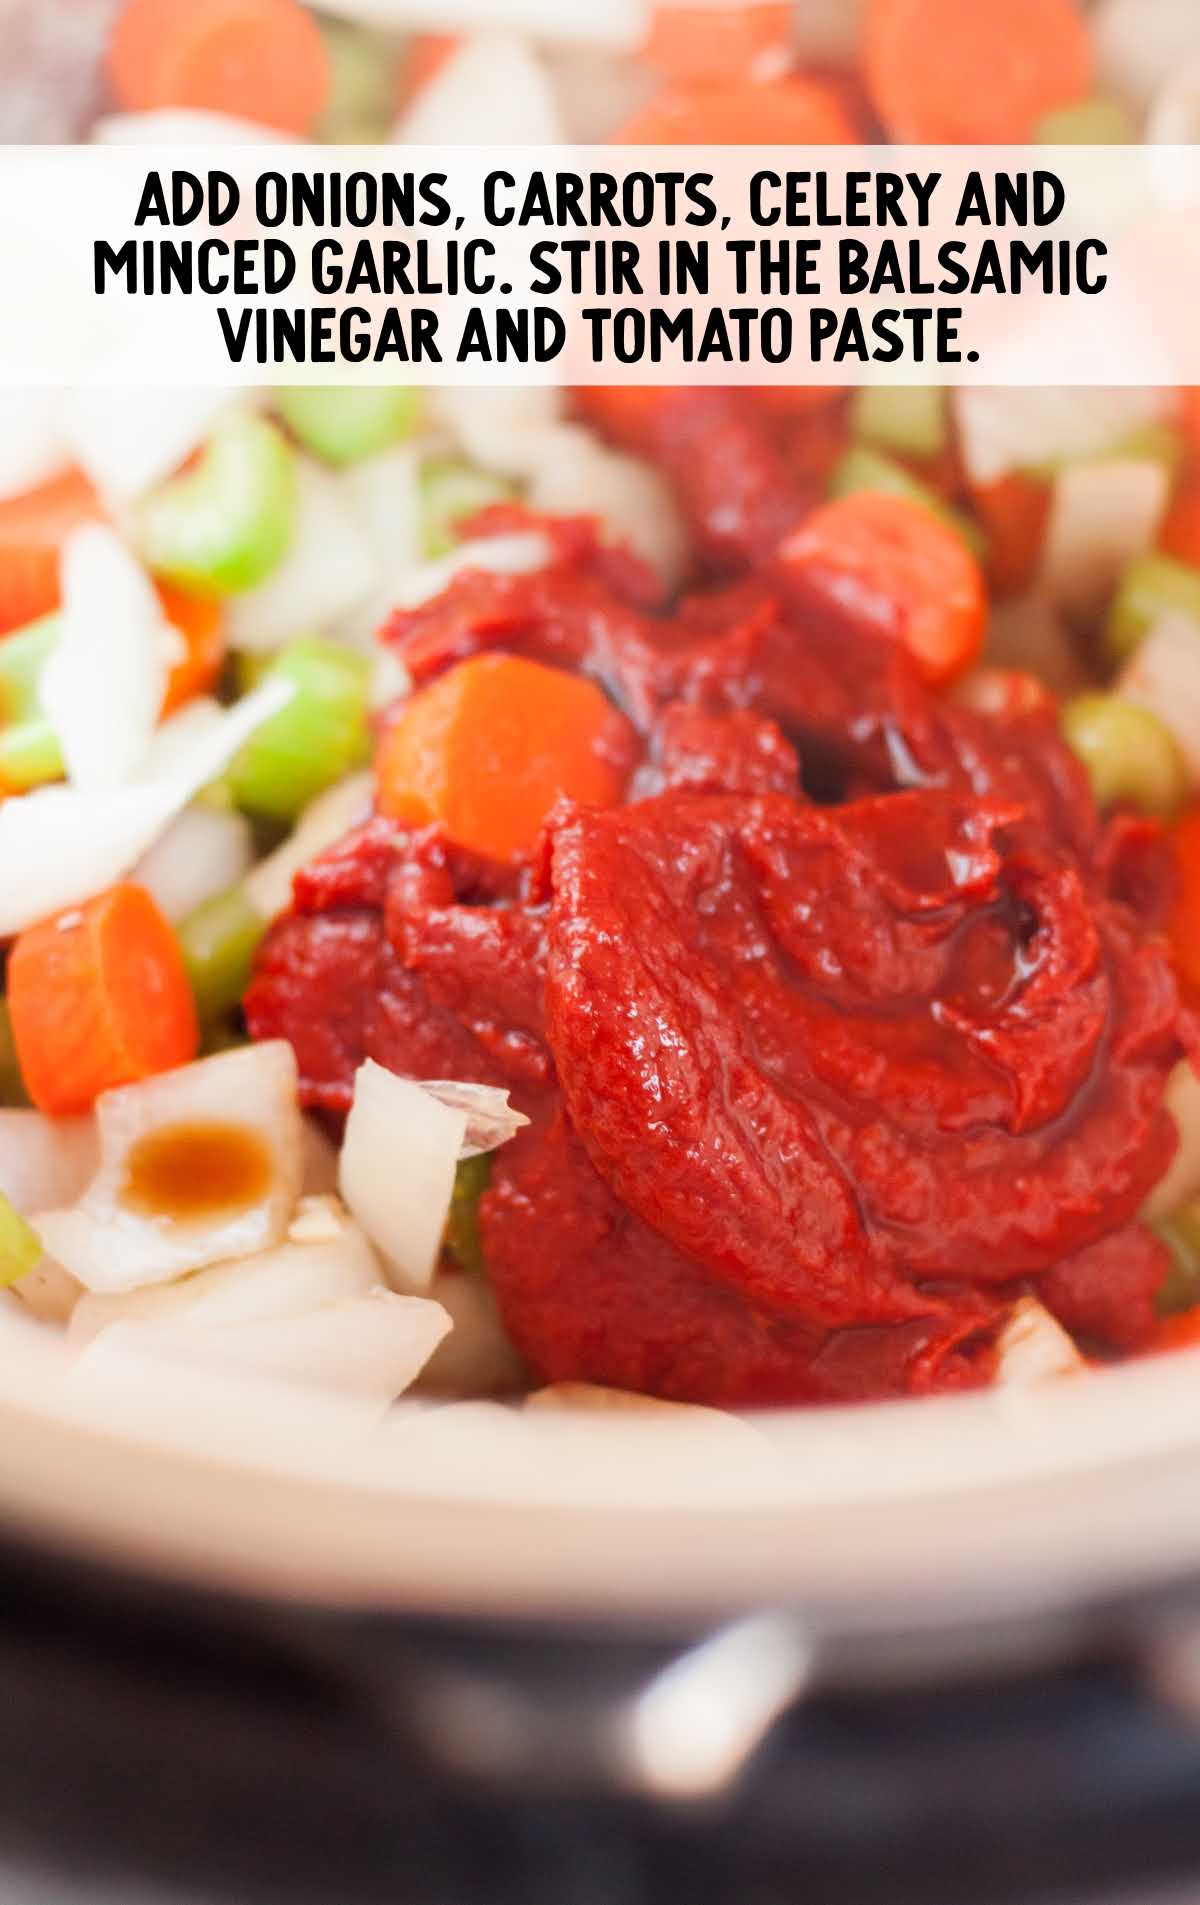 vegetables, vinegar, and tomato paste combined in a instant pot